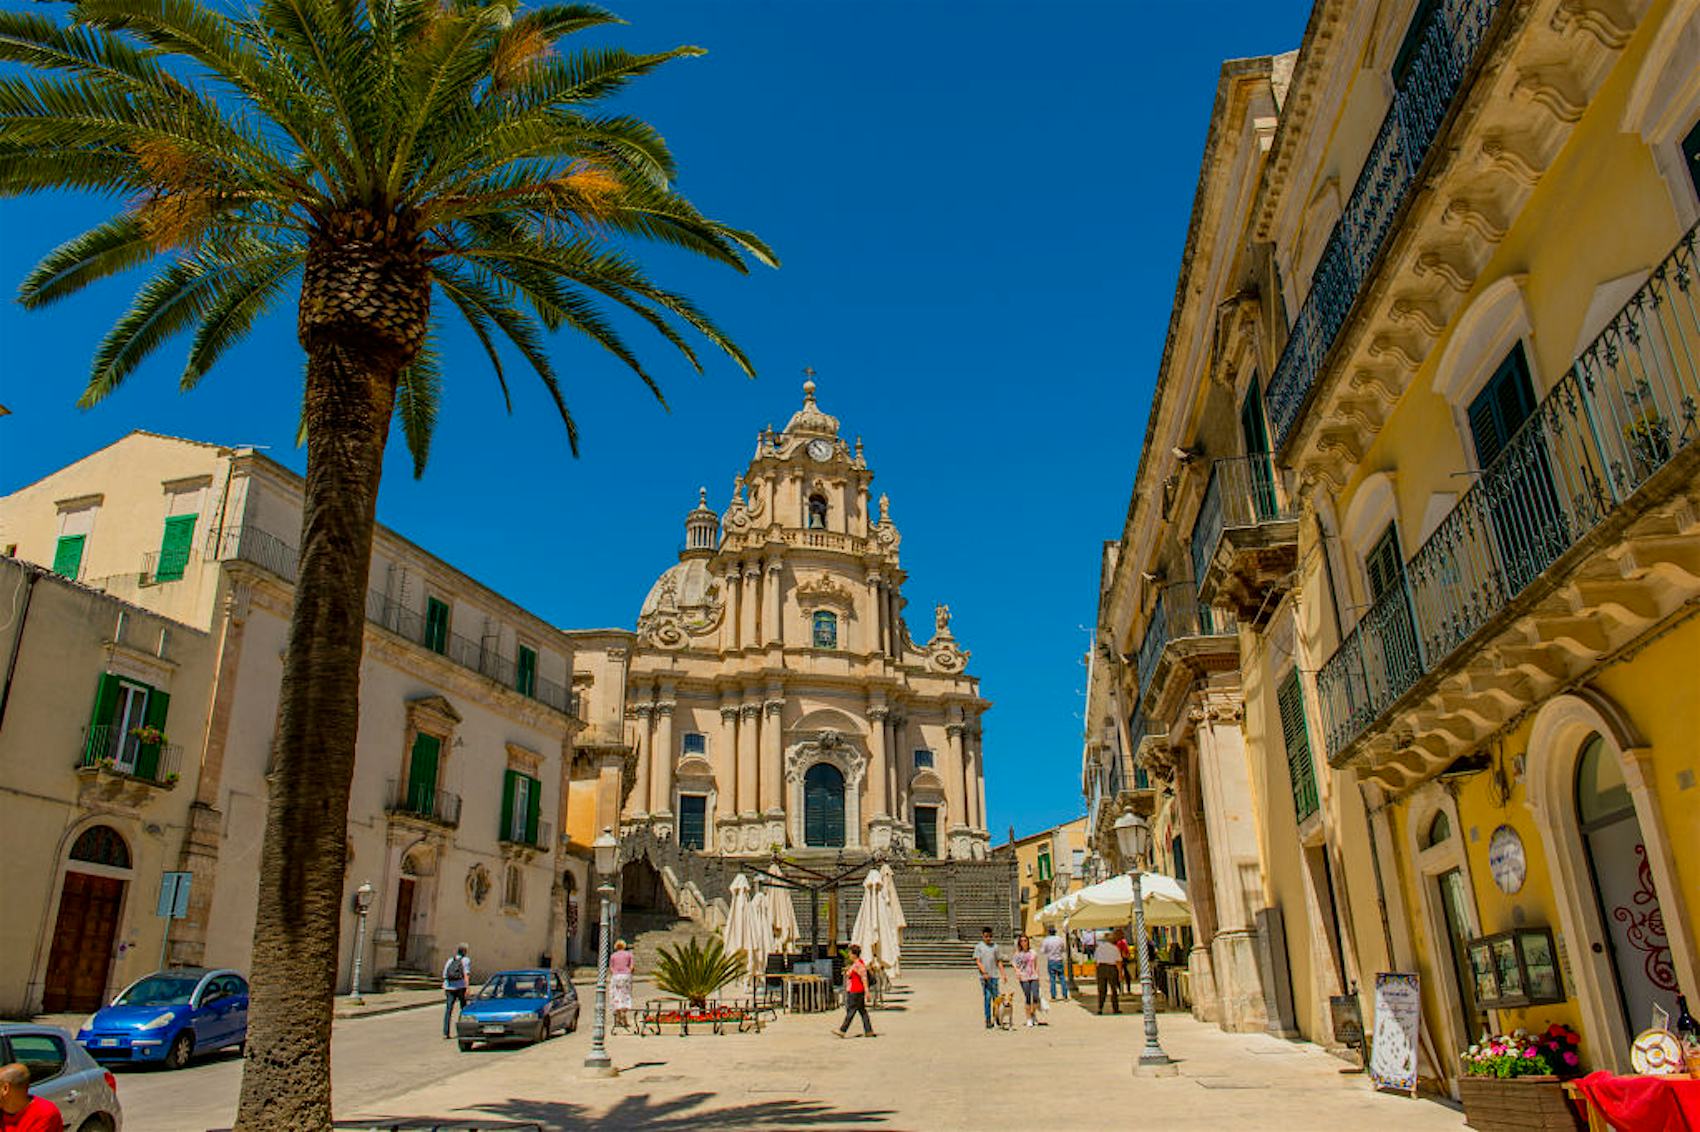 ITALY - 2015/05/12: City square with the Cathedral of San Giorgio (Saint George) in the town of Ragusa Ibla, on the island of Sicily in Italy.